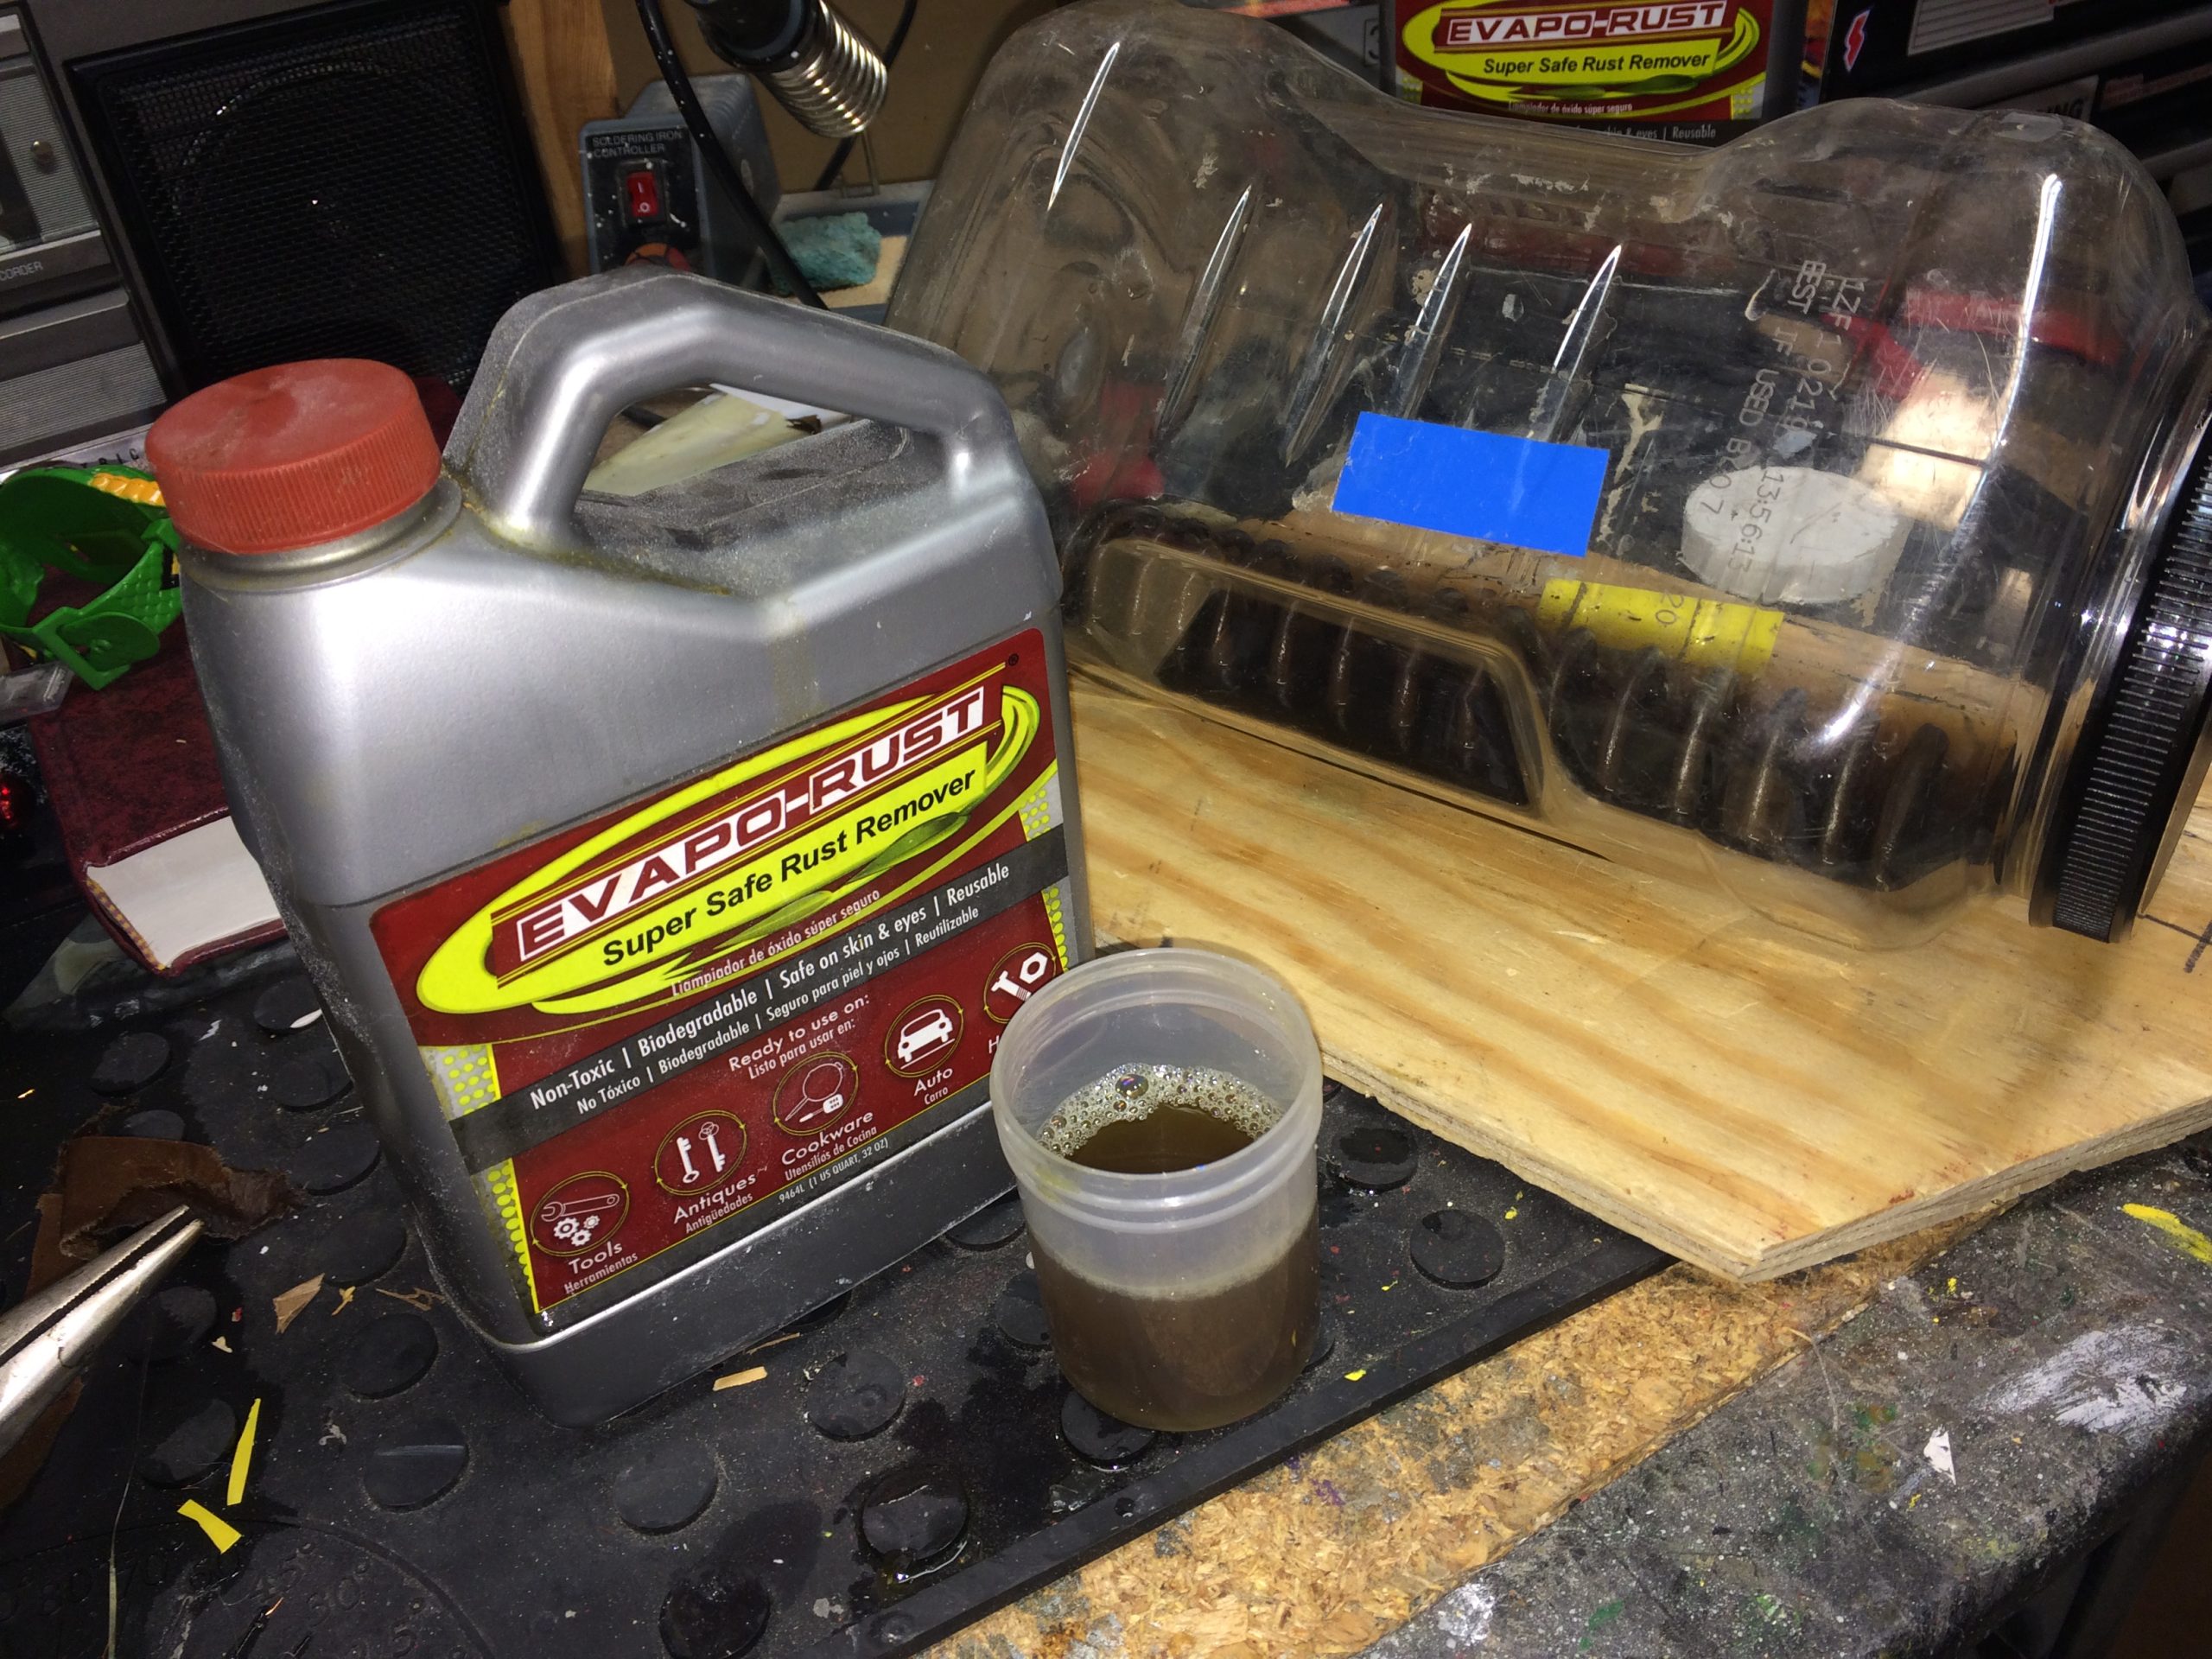 evaporust residue after cleaning rust from cv joint - Geo Metro Forum